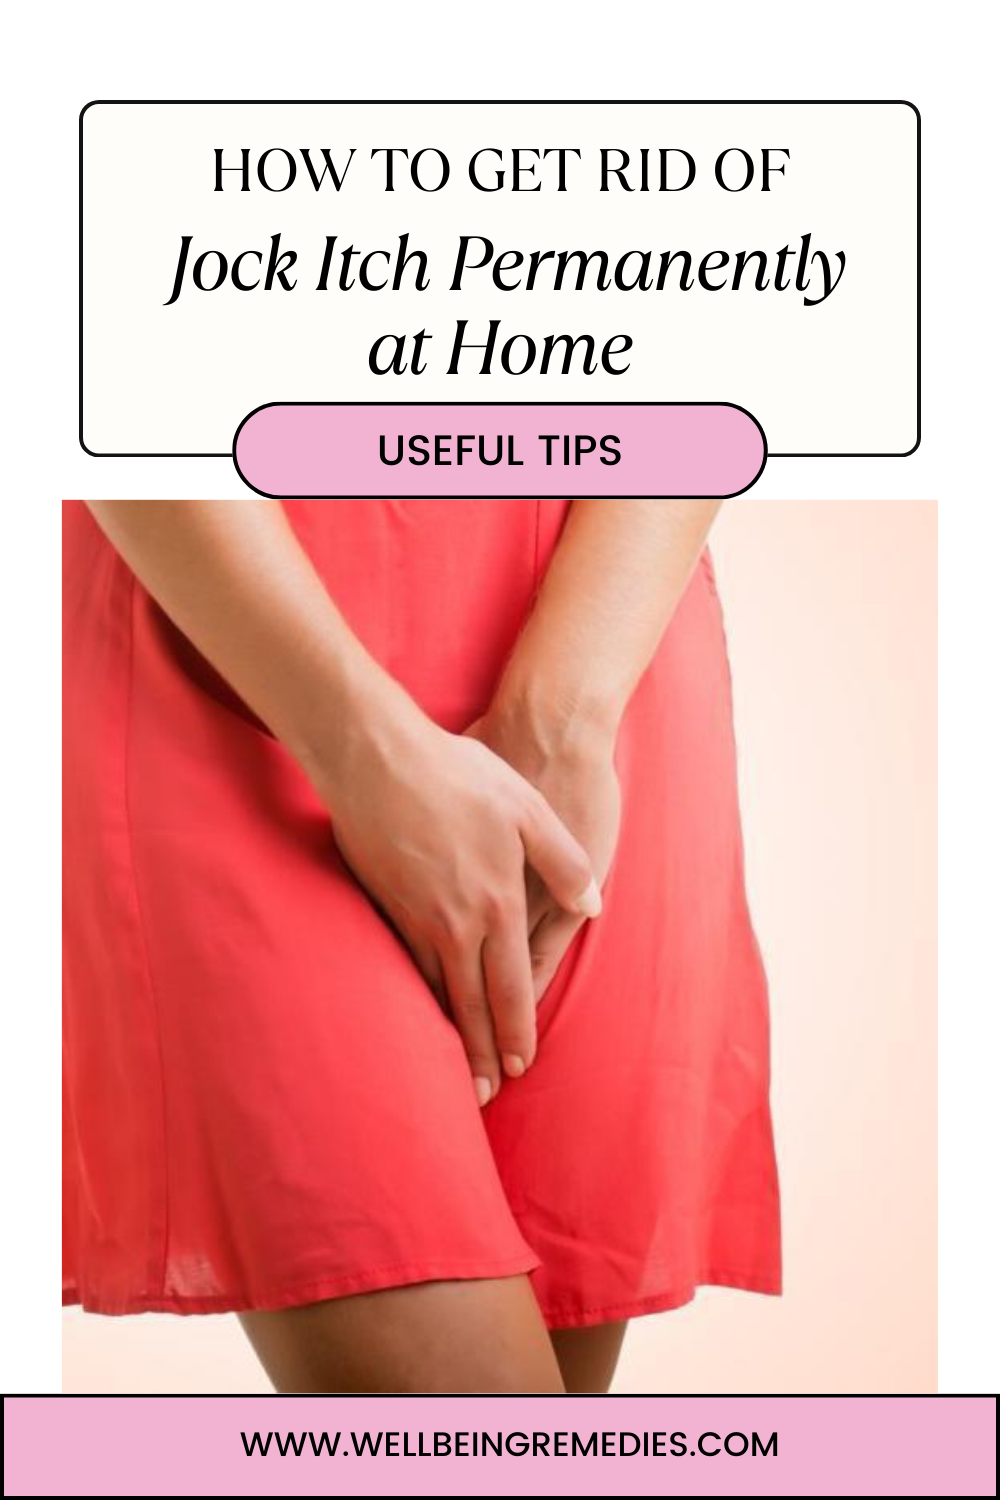 How to Get Rid of Jock Itch Permanently at Home